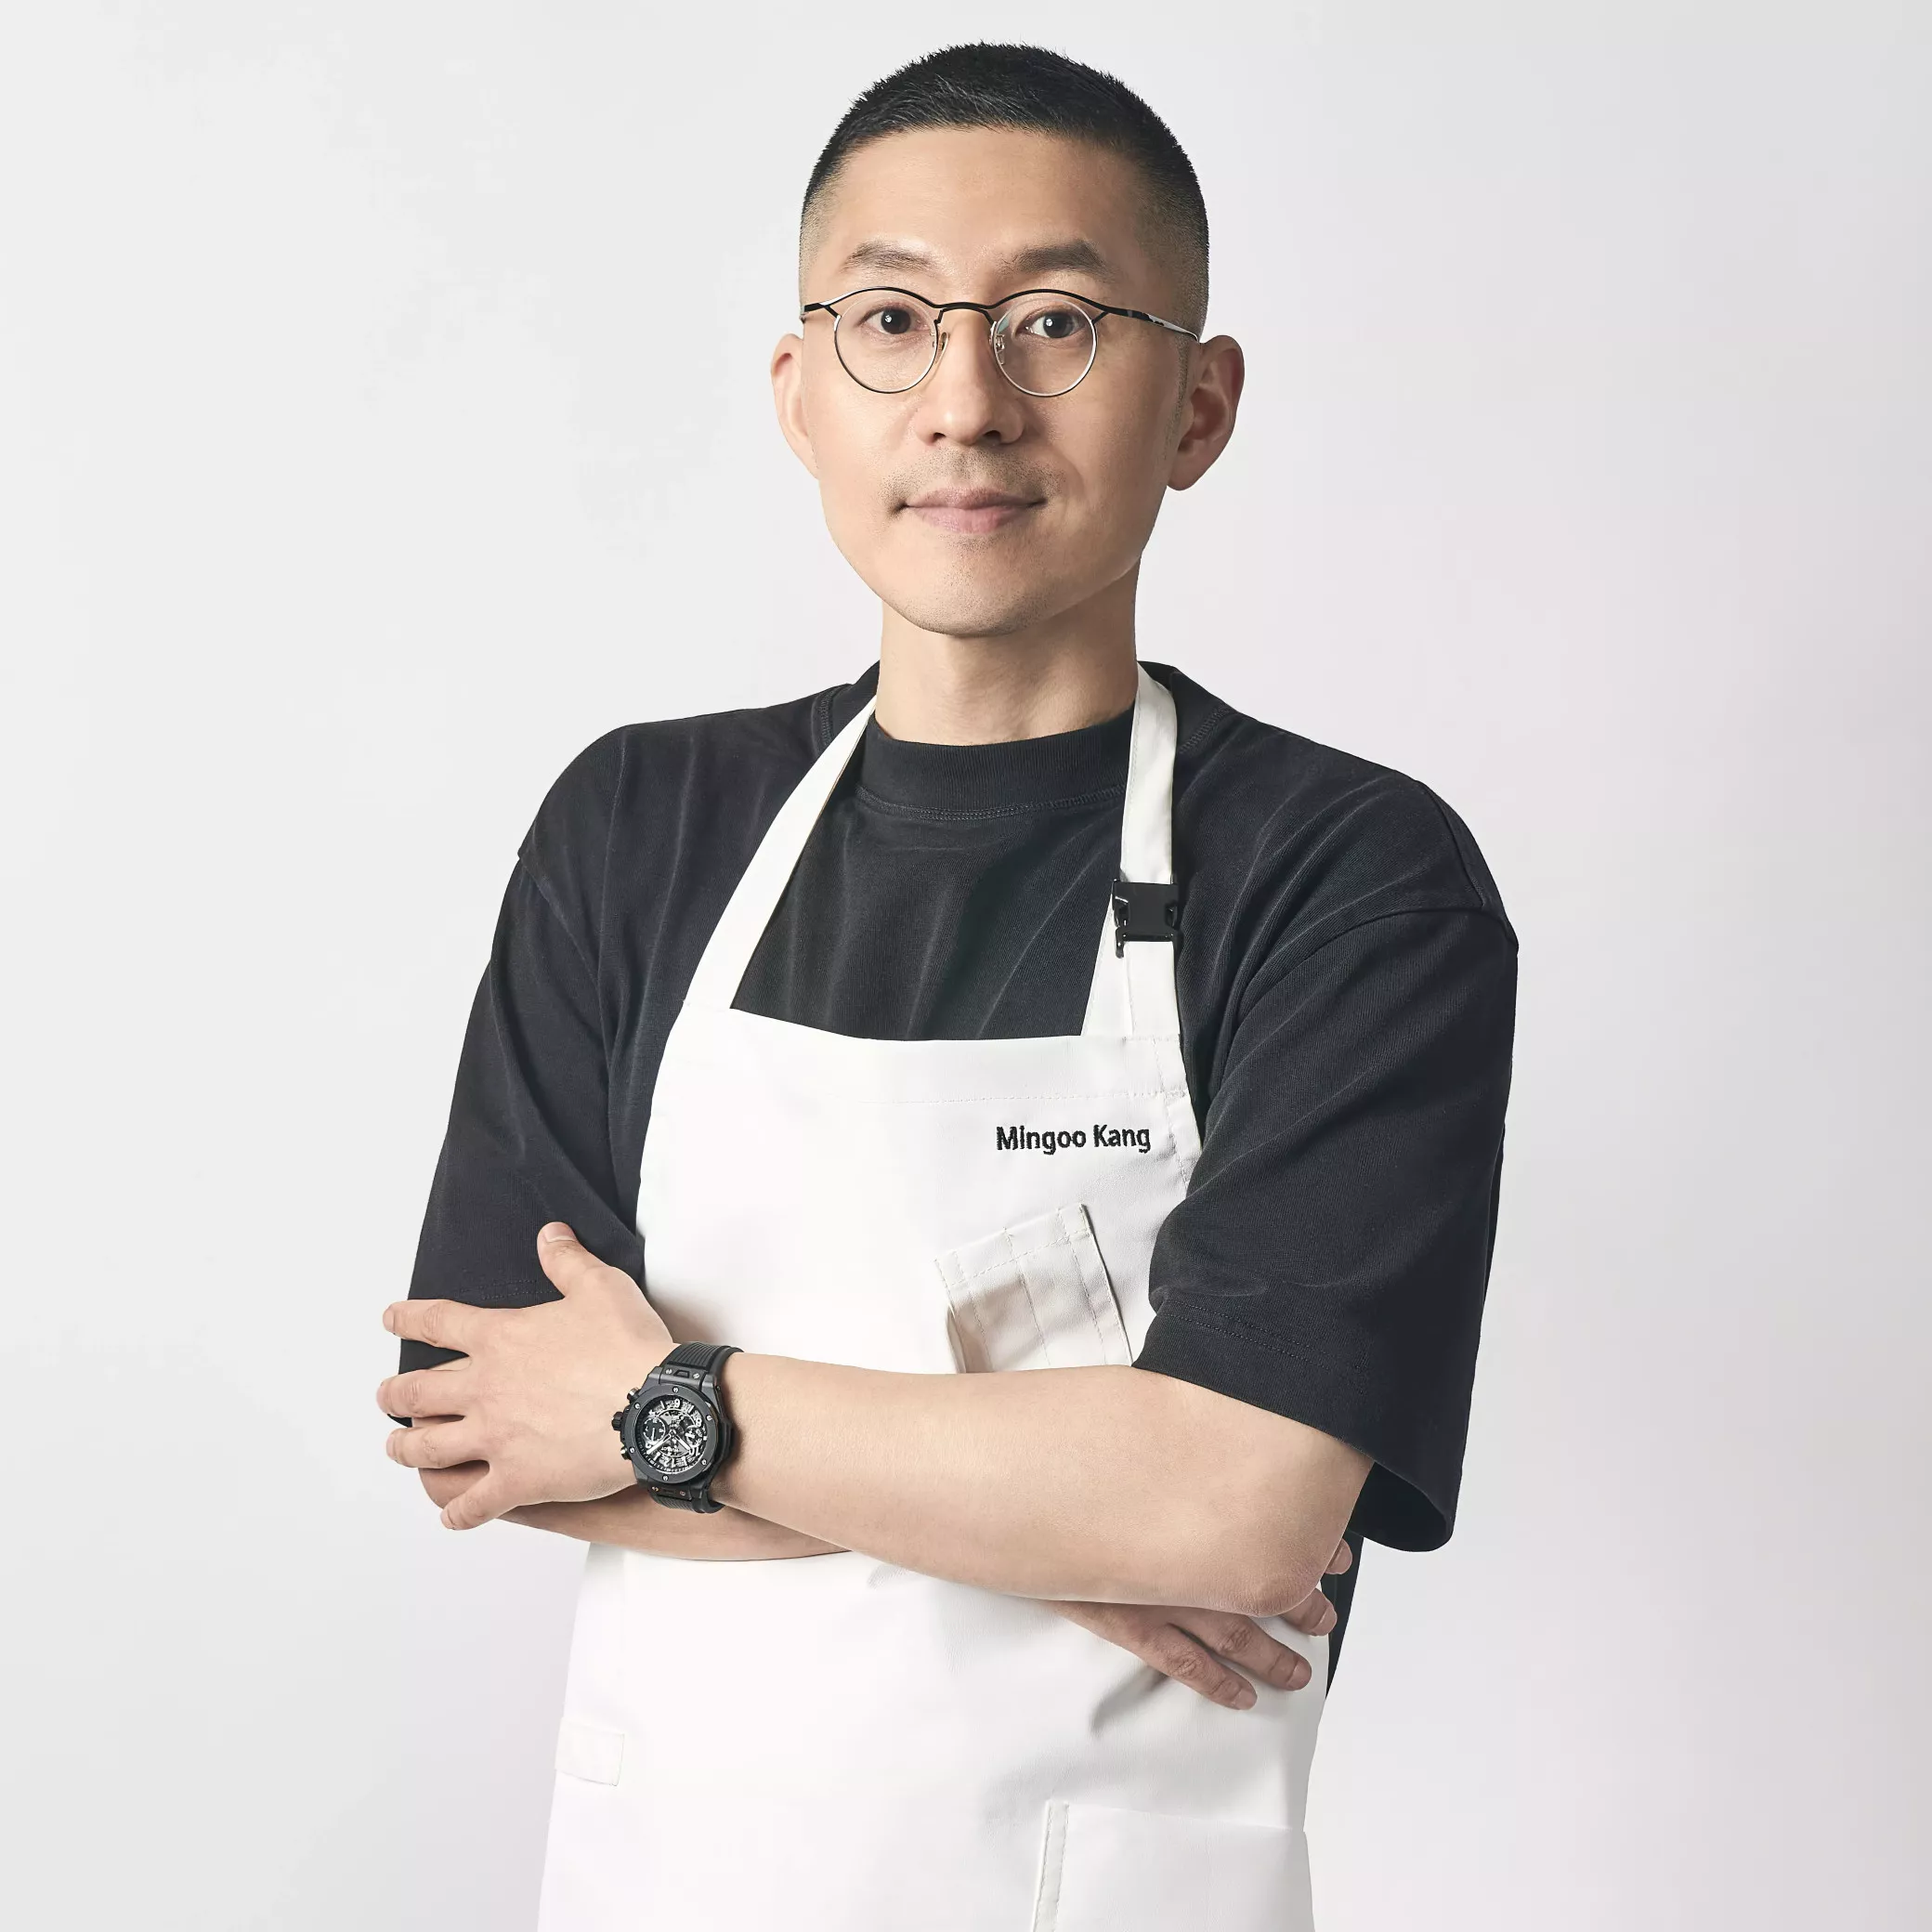 Hublot Welcomes Culinary Visionary Mingoo Kang as Friend of the Brand